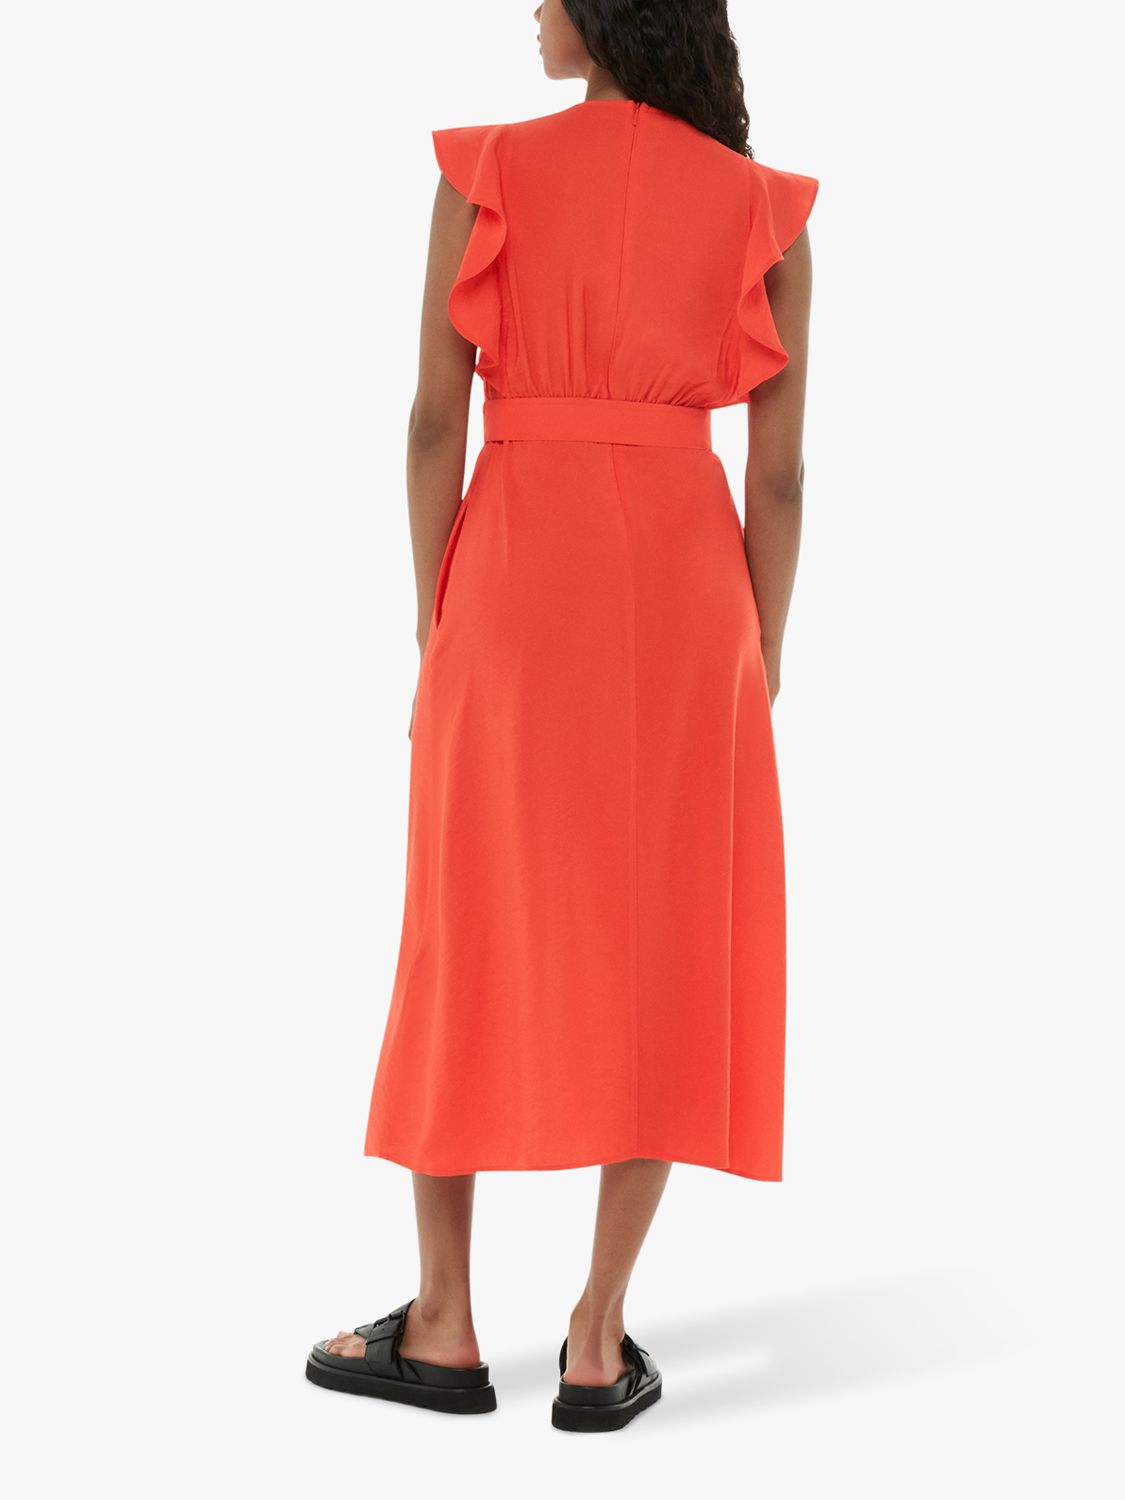 Whistles Sophie Frill Sleeve Midi Dress, Red at John Lewis & Partners